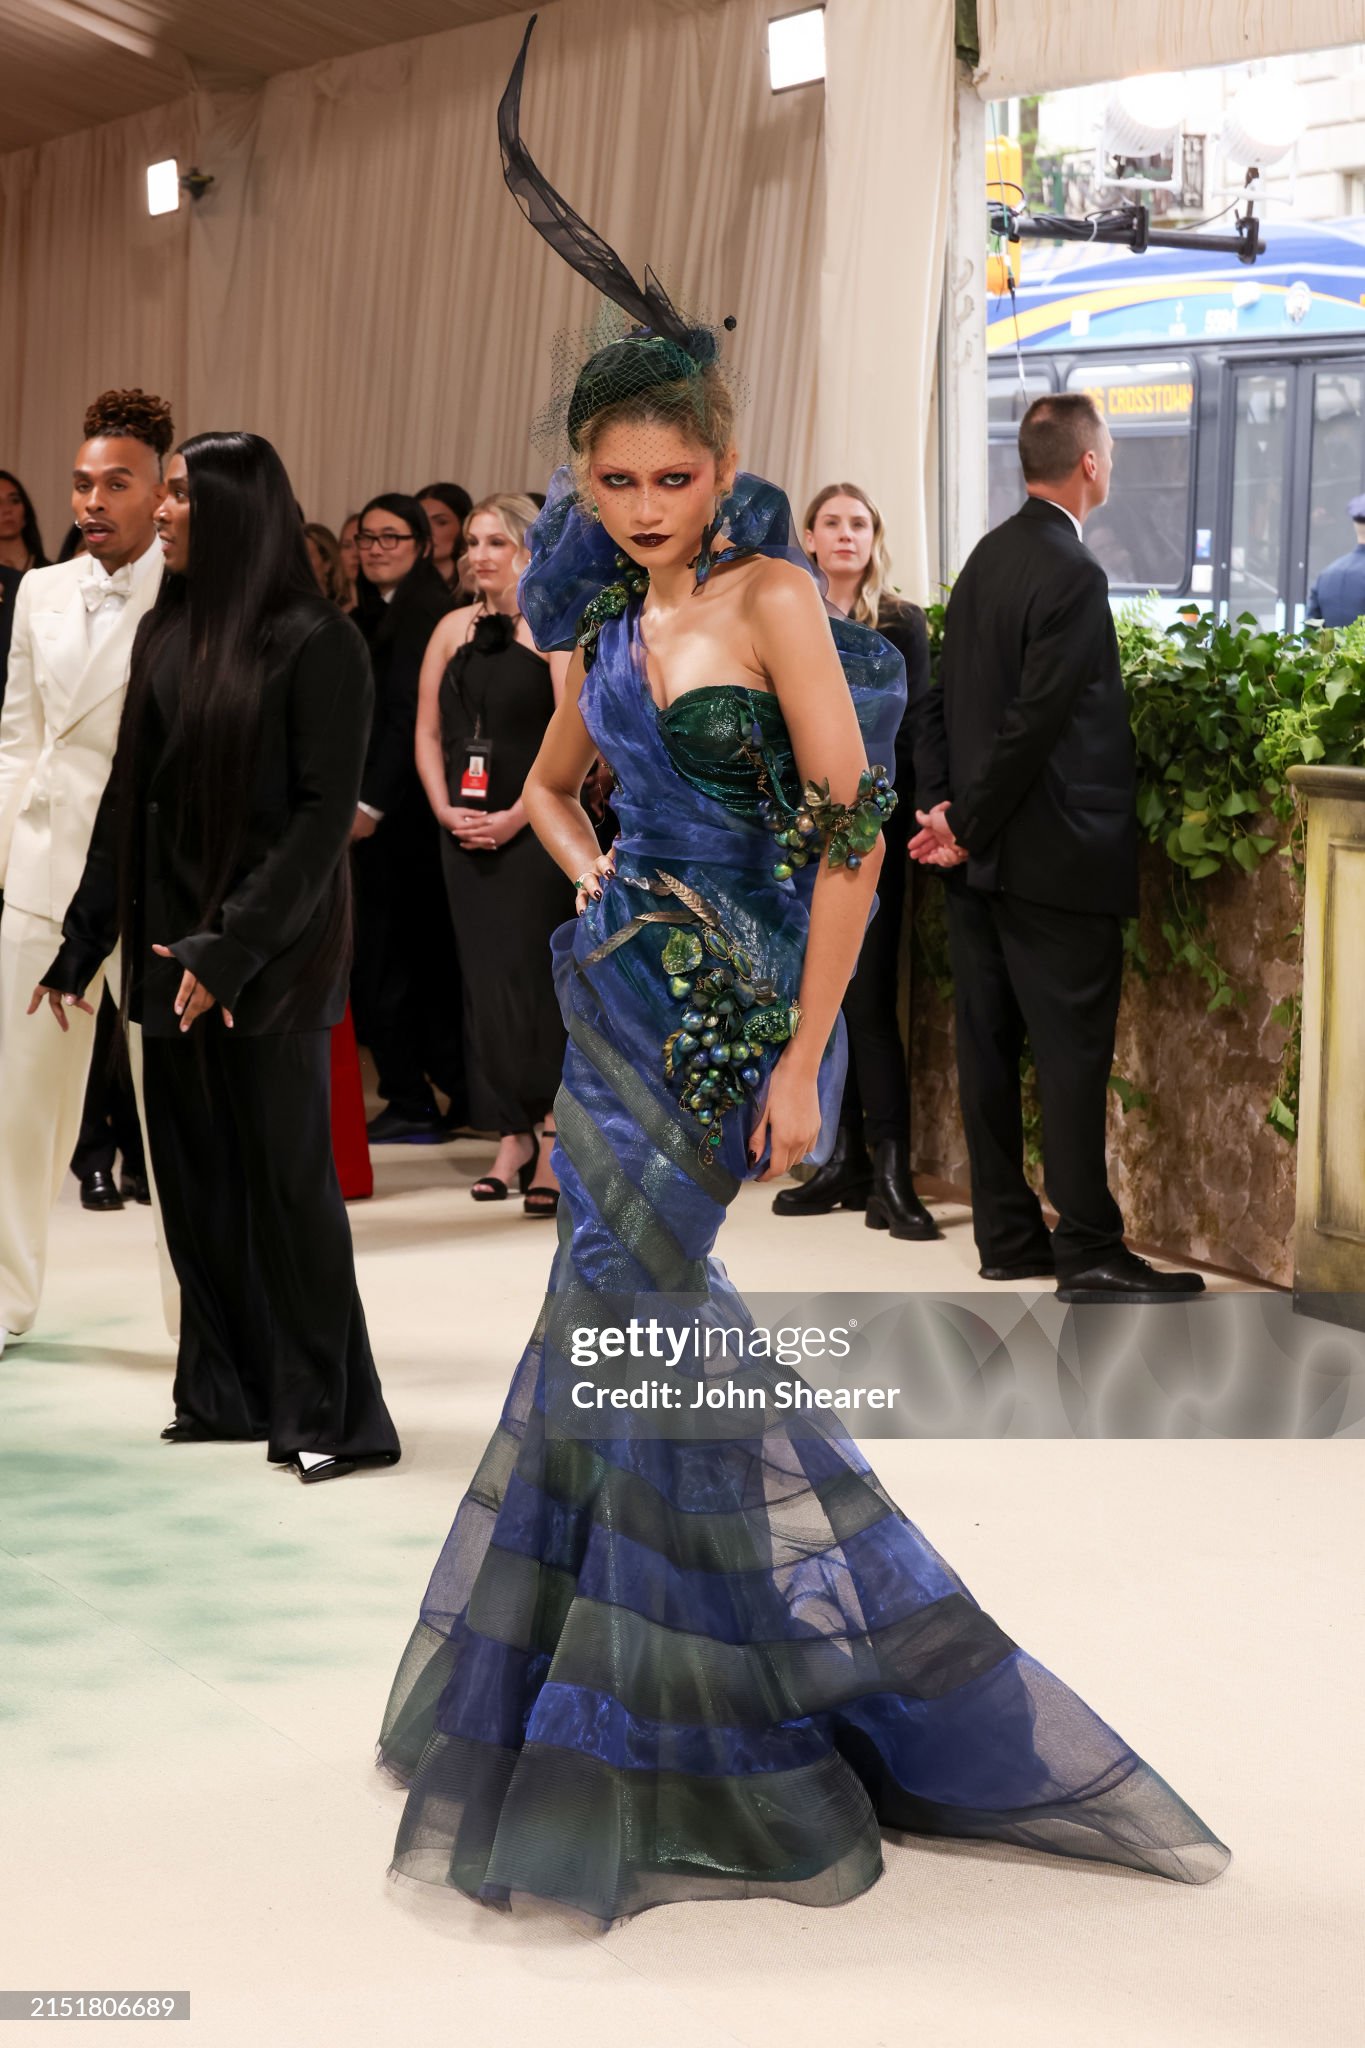 gettyimages-2151806689-2048x2048.jpg